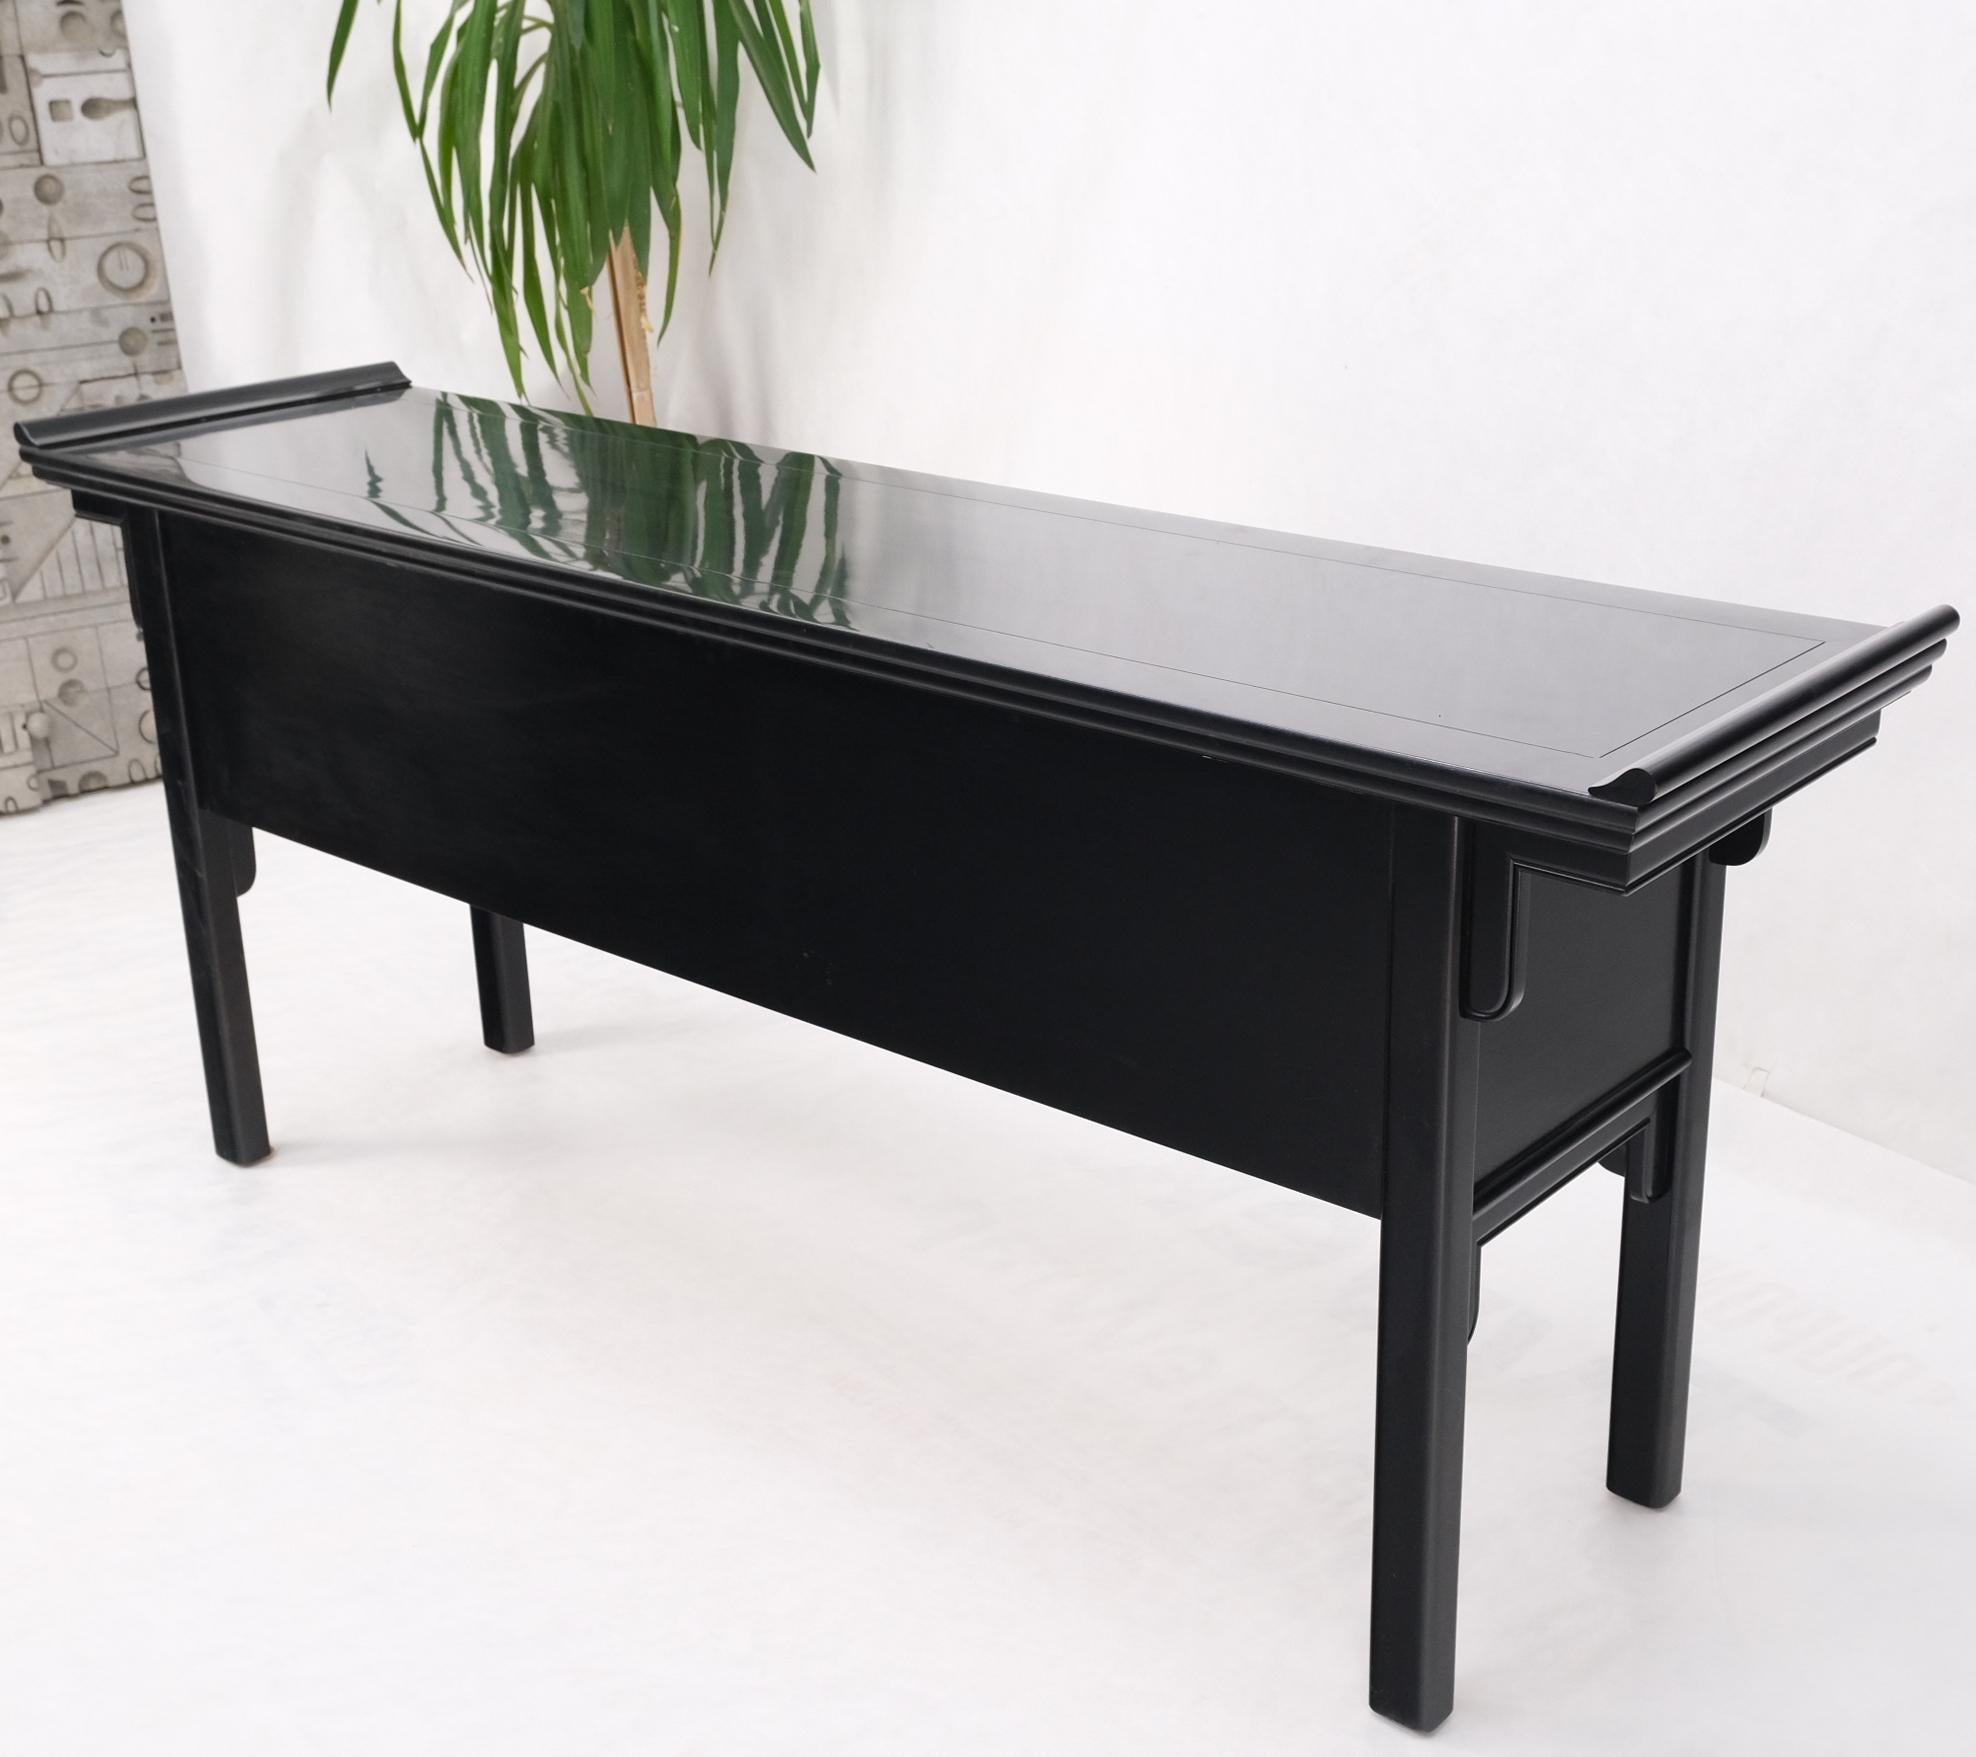 Black Lacquer Brass Hardware 5 Drawers Oriental Long Credenza Console Table Mint 5